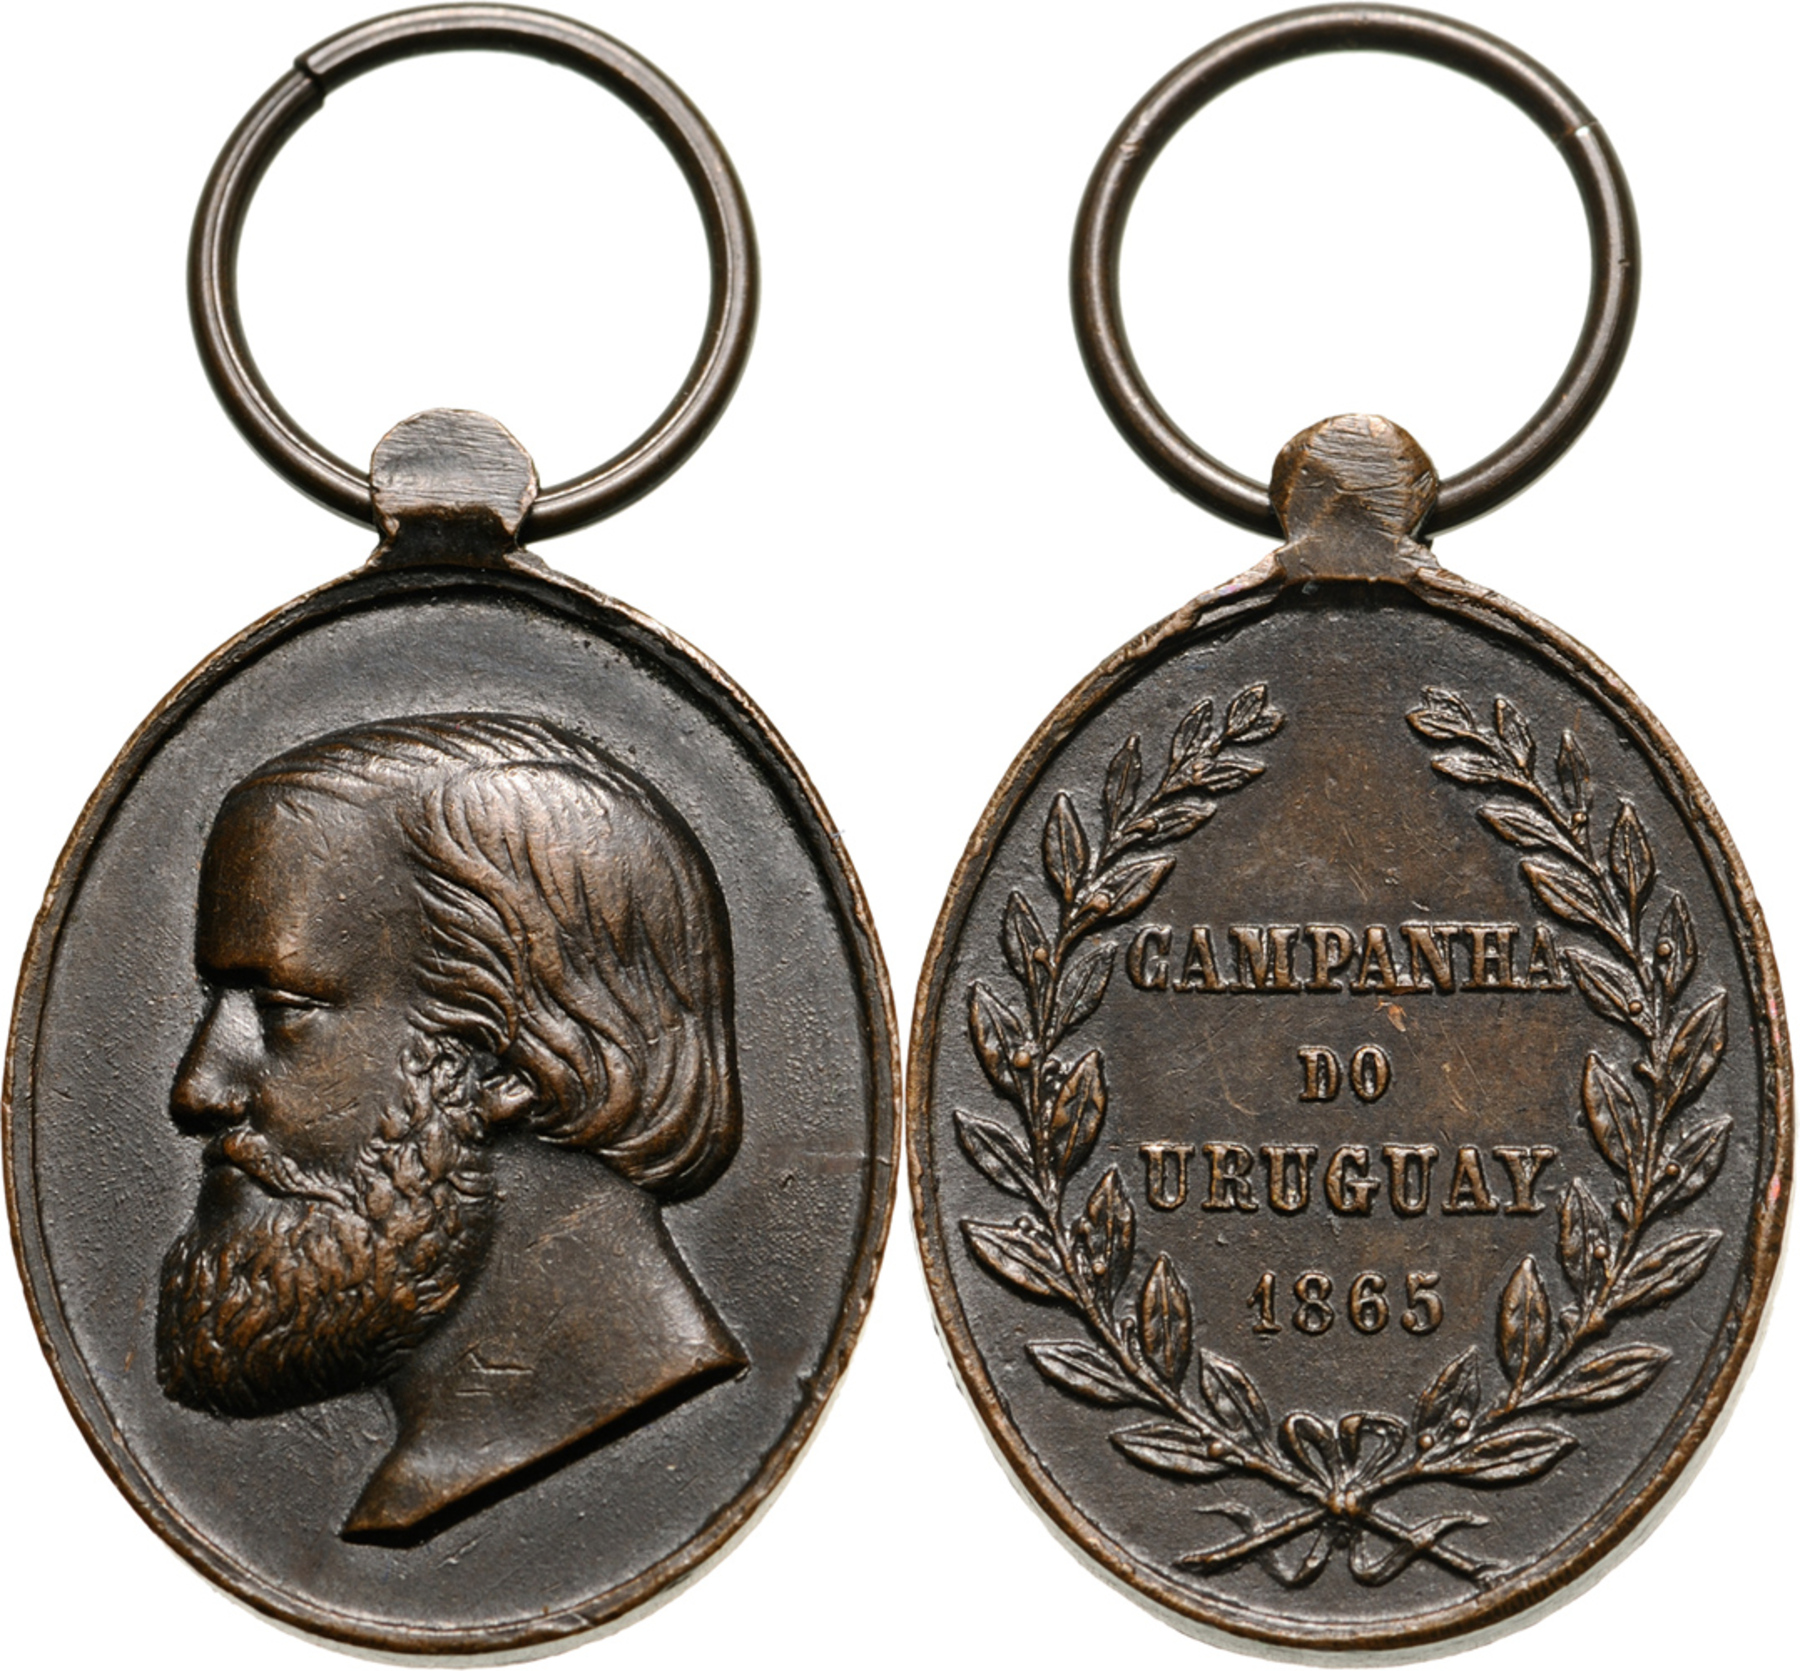 Uruguay Campaign Medal for the Troops, instituted in 1864